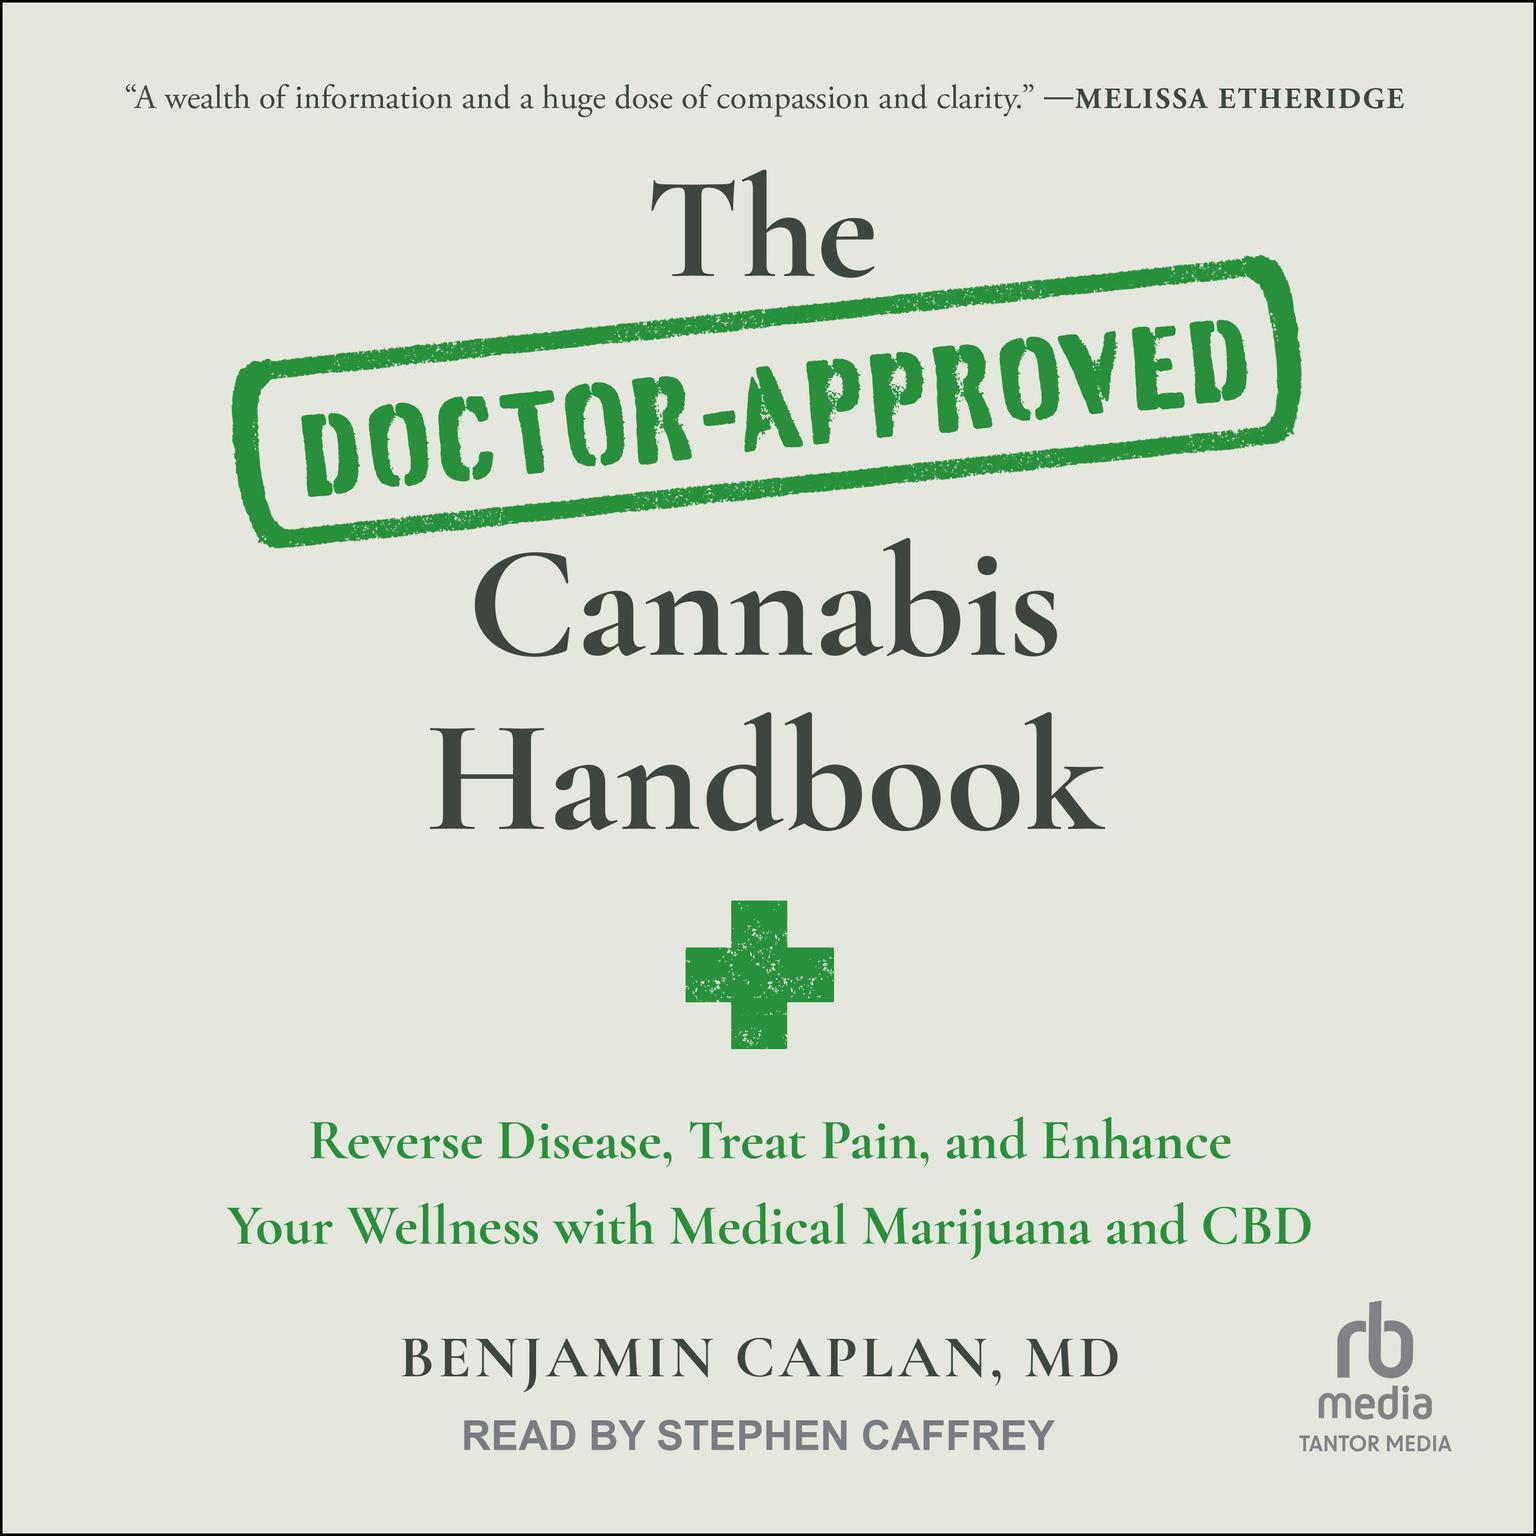 The Doctor-Approved Cannabis Handbook: Reverse Disease, Treat Pain, and Enhance Your Wellness with Medical Marijuana and CBD Audiobook, by Benjamin Caplan